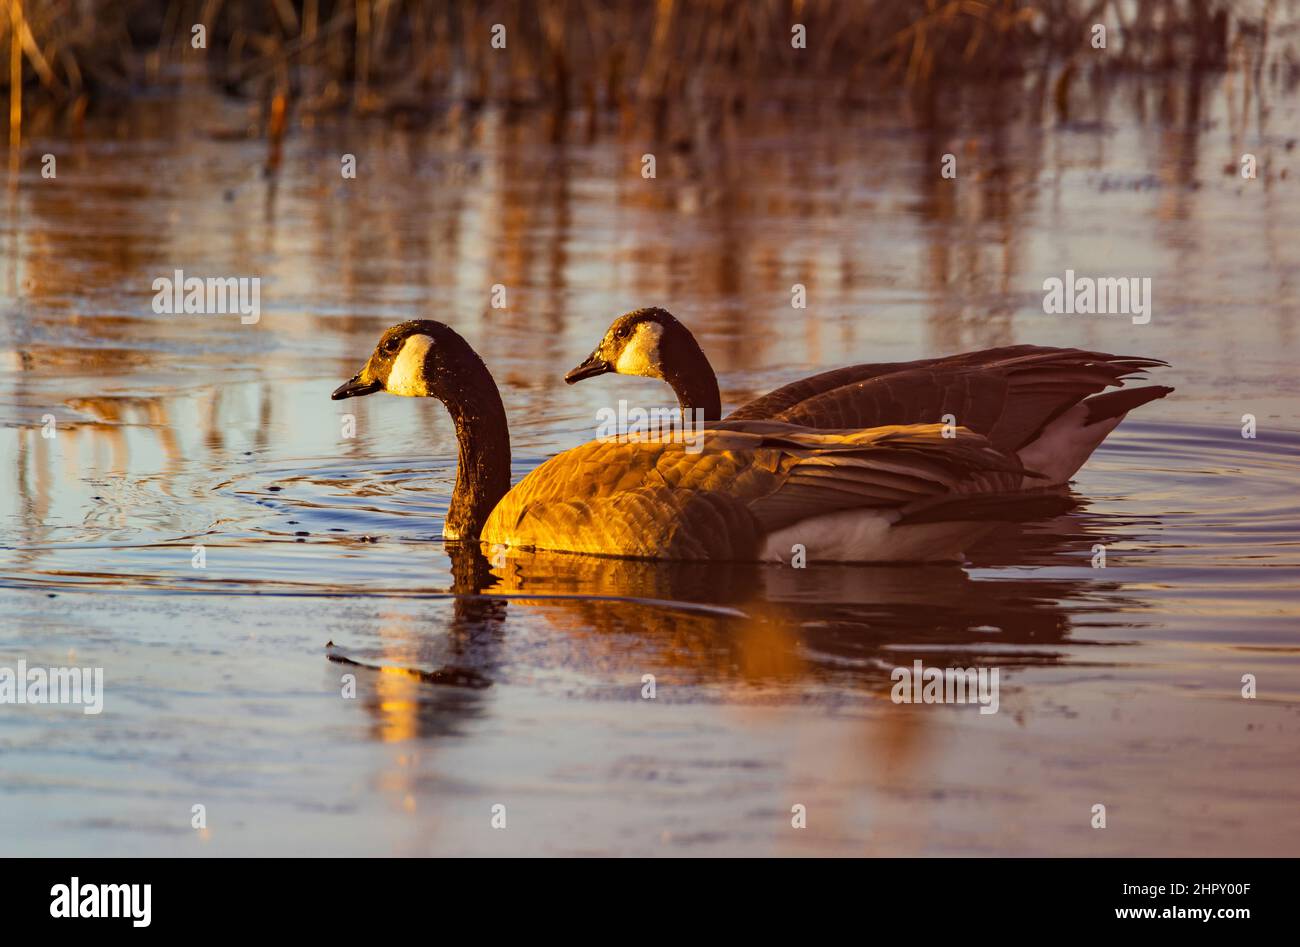 Two Canada Geese (Branta Canadensis) glide on the water in the late afternoon light at Farmington Bay Waterfowl Management Area, Farmington, Utah, USA. Stock Photo